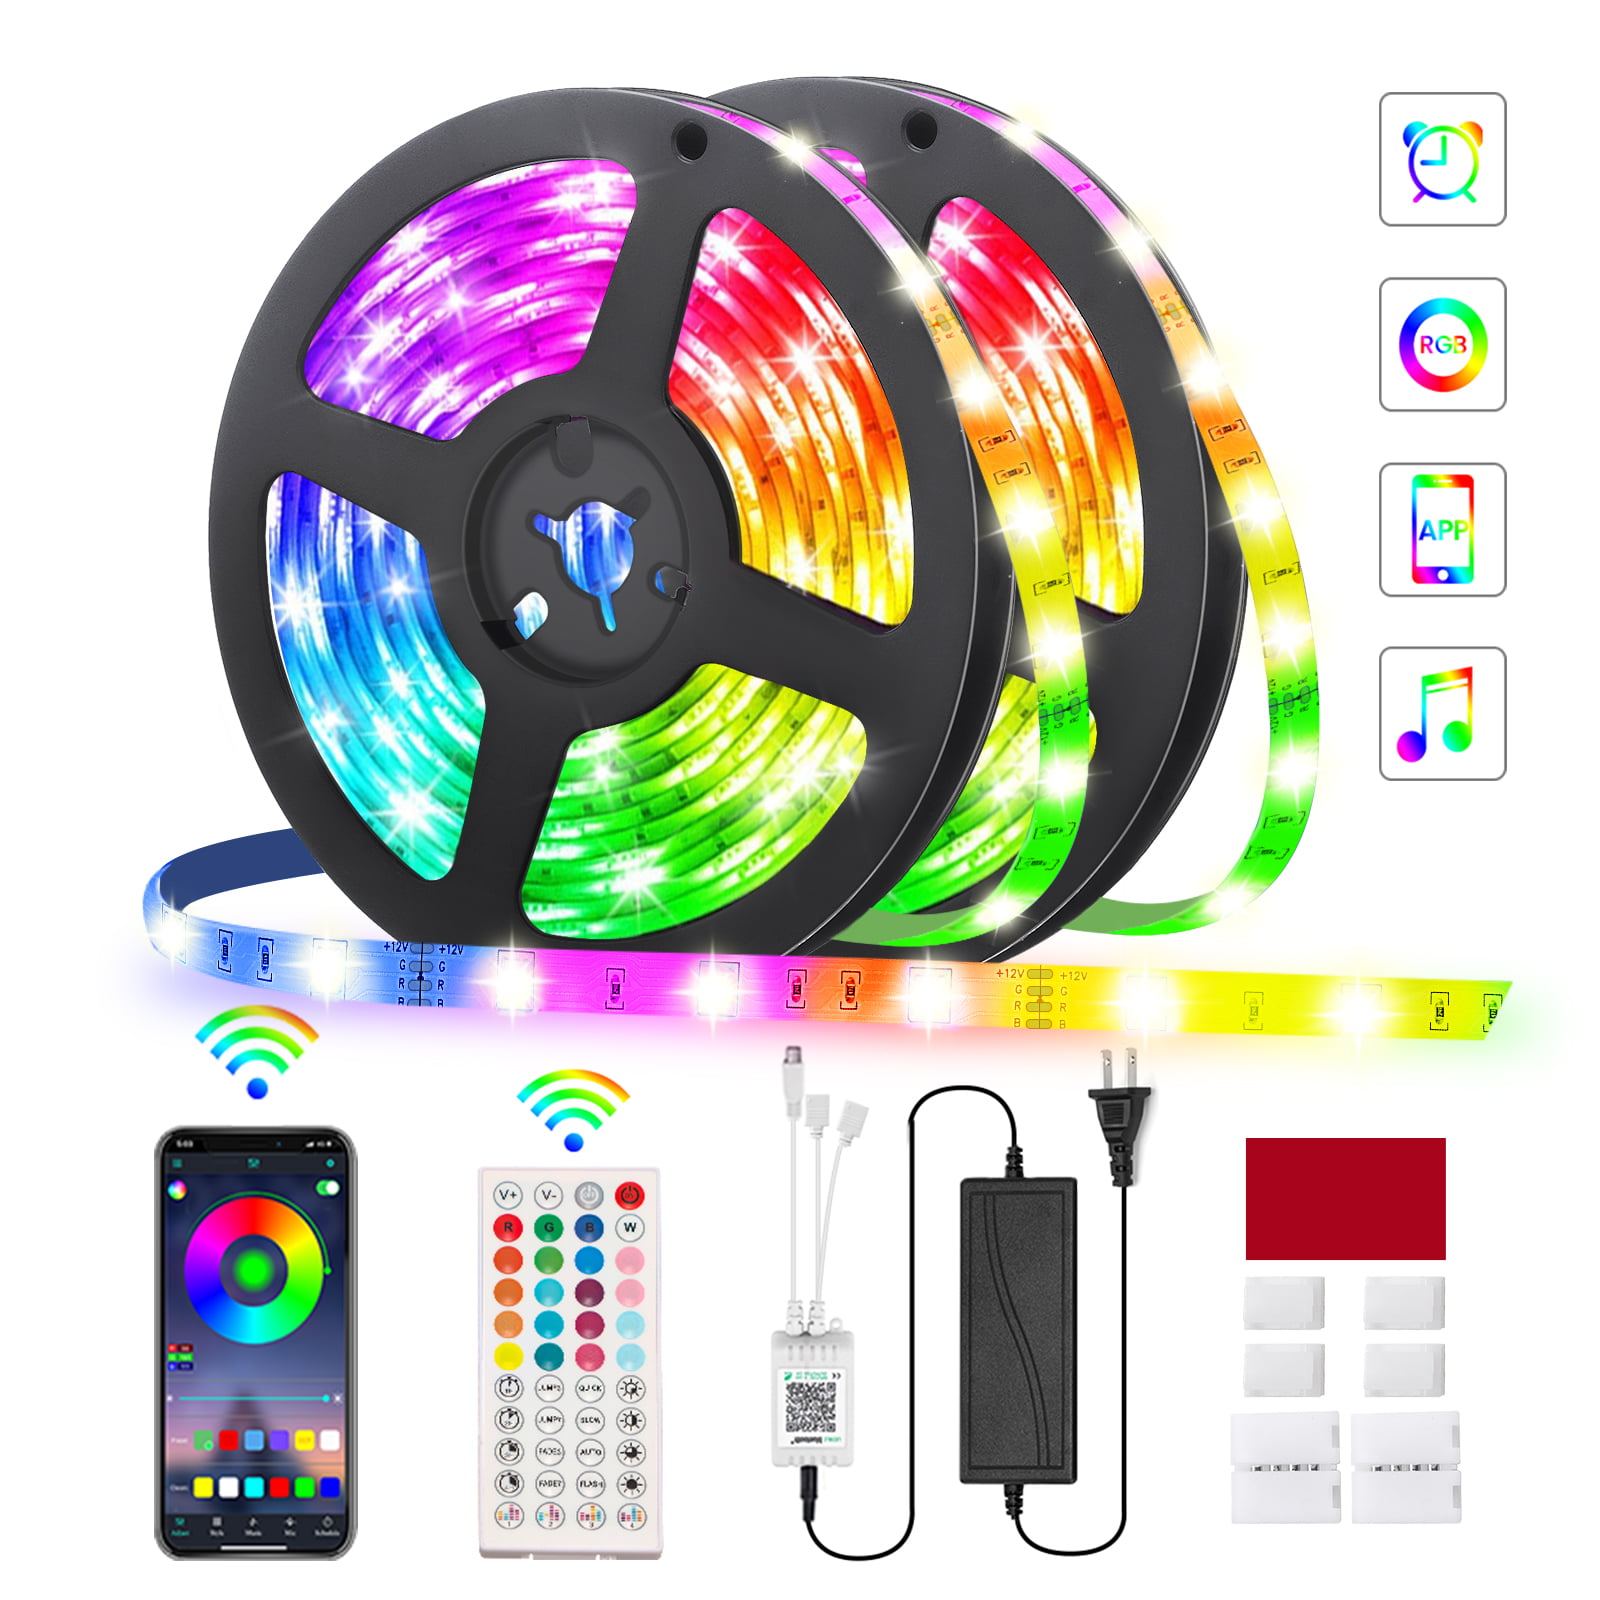 12V SMD 5050 Color Changing Tape Lights kit with LED Controller LED Strip Lights with Remote 32.8ft RGB LED Light Strip Music Sync for Room Lighting Flexible Waterproof LED Strip for Home Kitchen